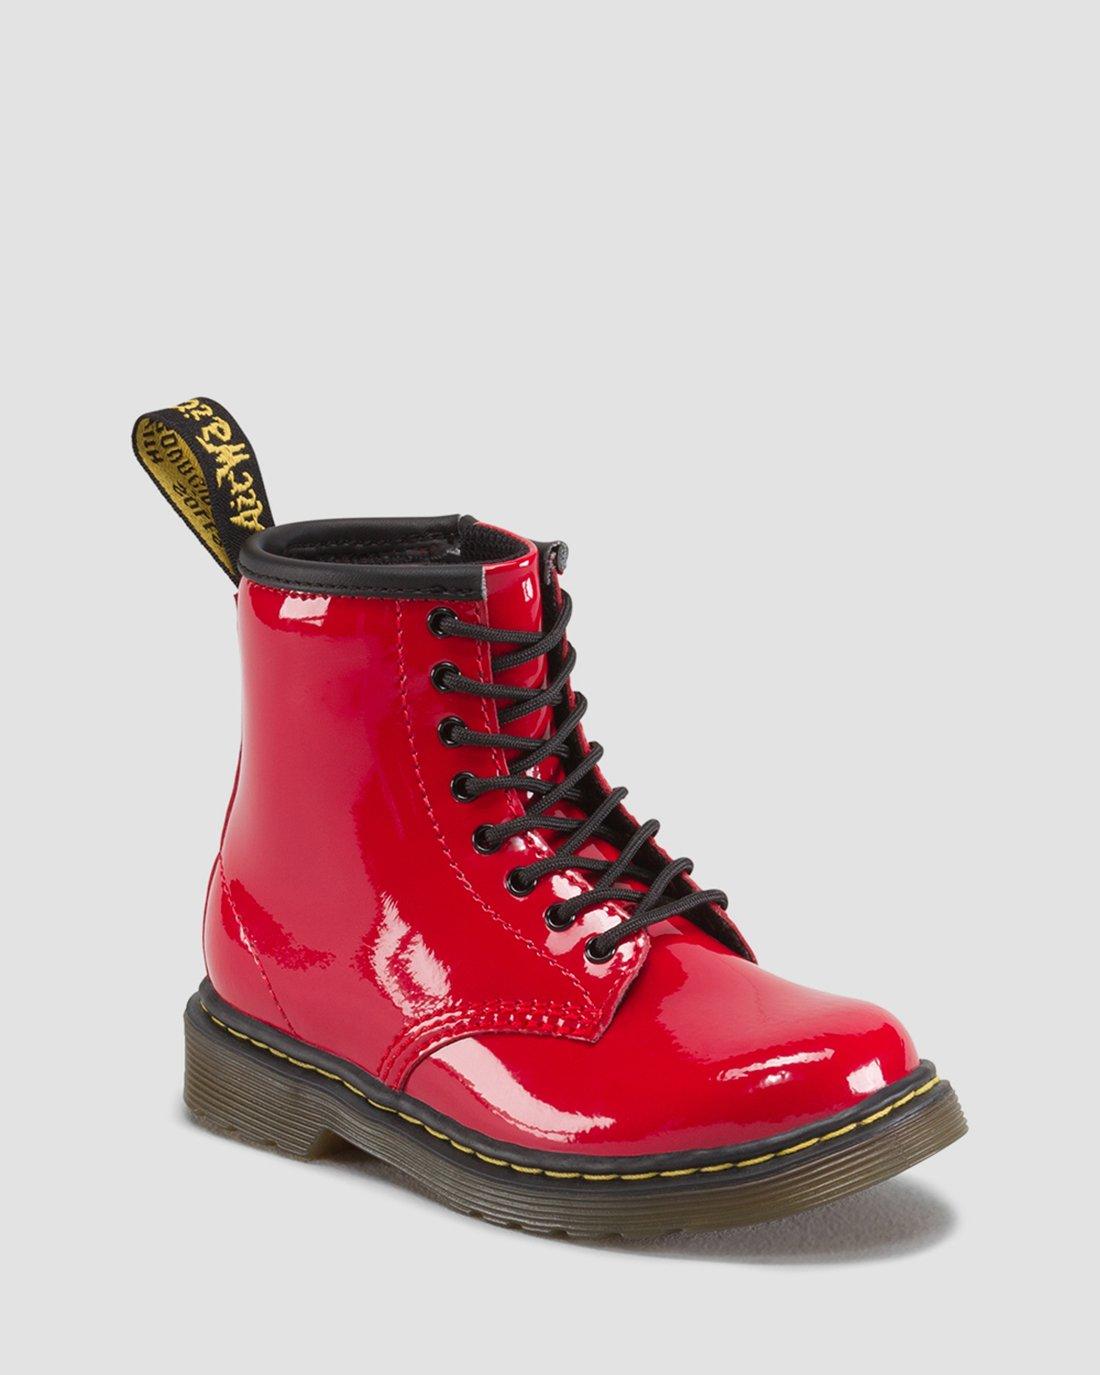 doc martens patent leather 146